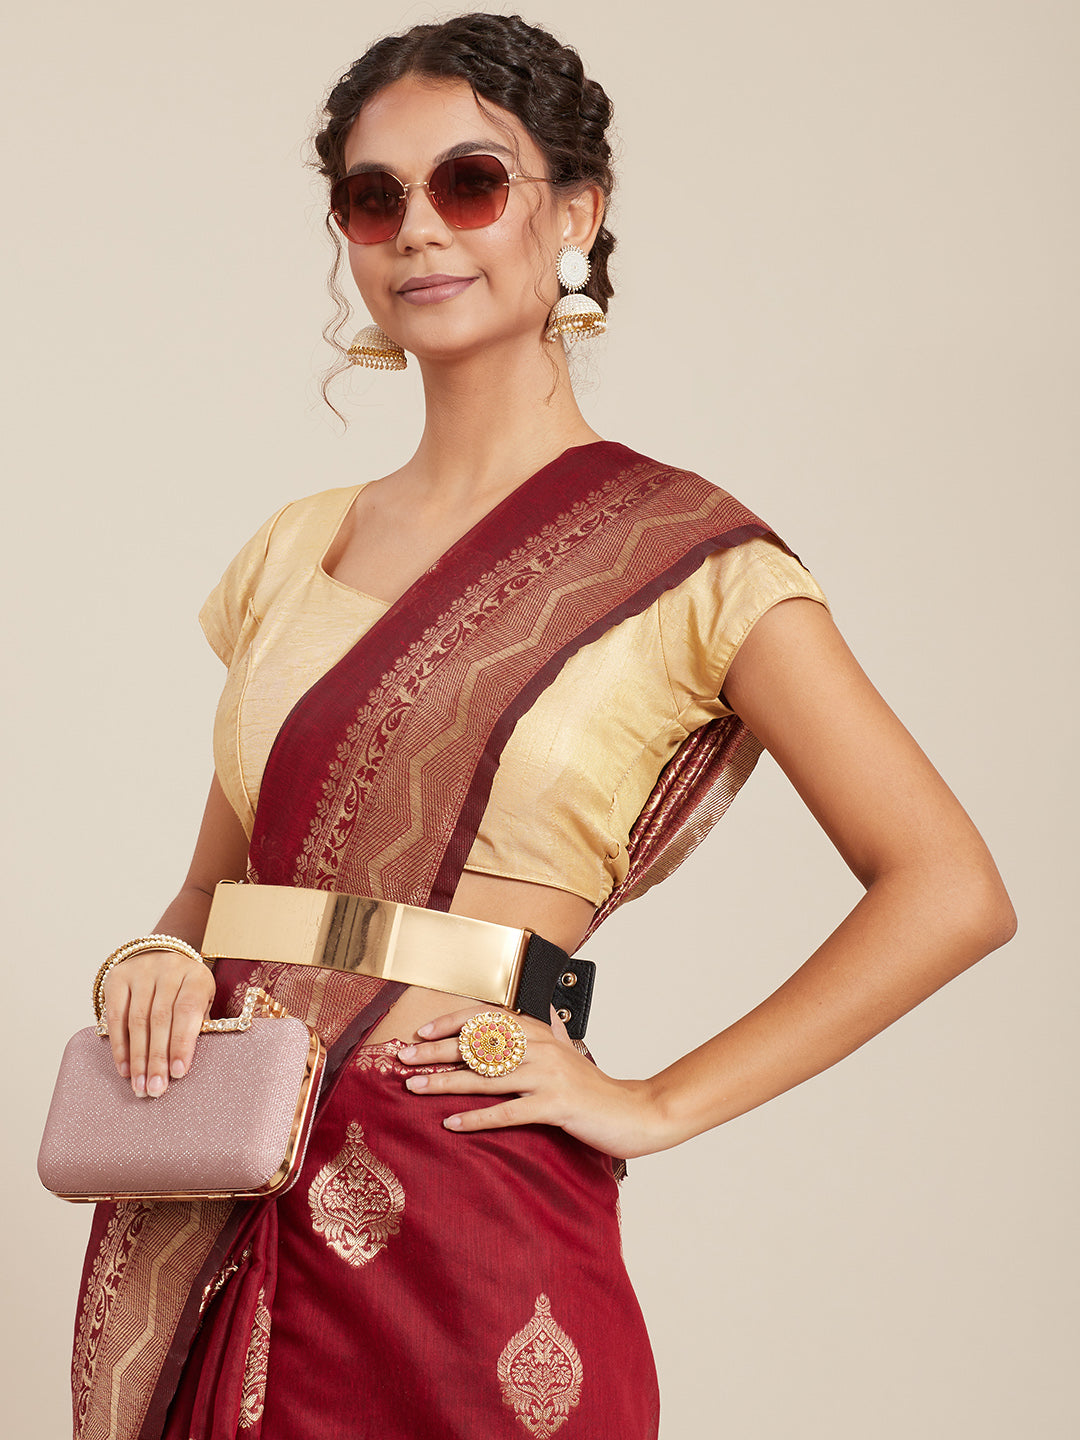 Maroon Cotton Blend Woven Design Saree With Blouse